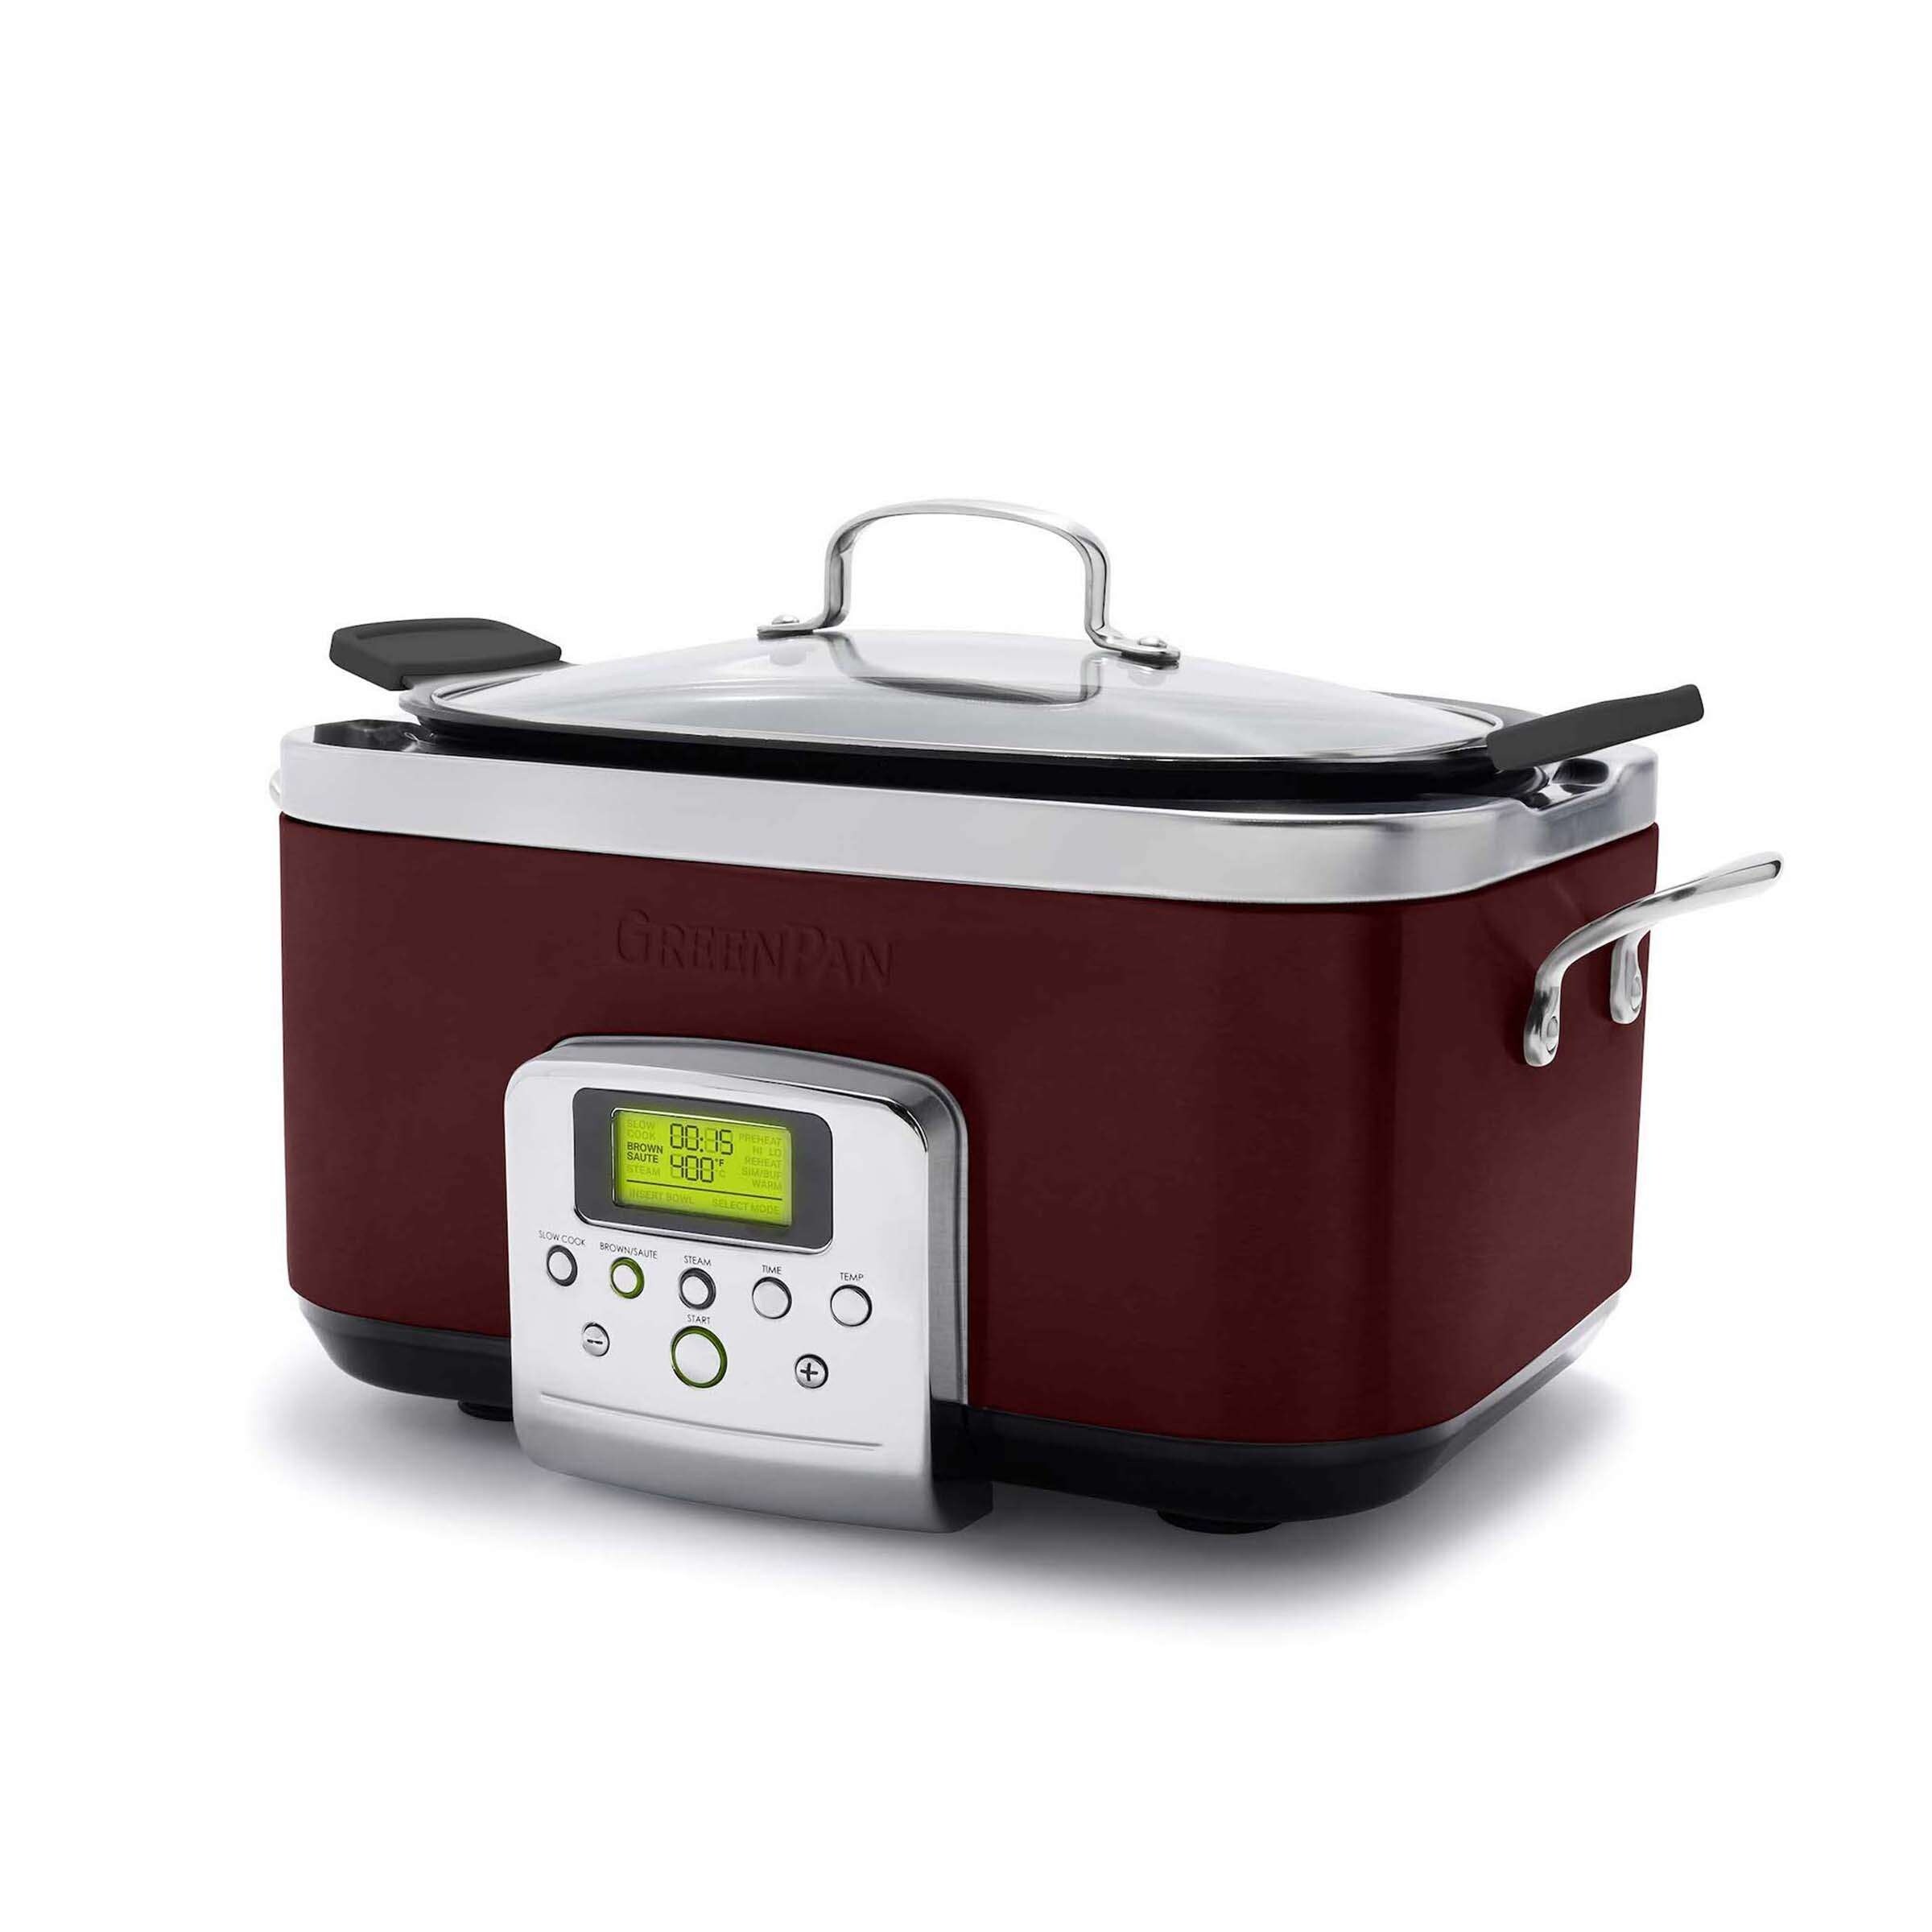 https://ak1.ostkcdn.com/images/products/is/images/direct/32db7faa335e84aeef40dd5a534624e06ed9acfb/GreenPan-Elite-6-Quart-Slow-Cooker.jpg